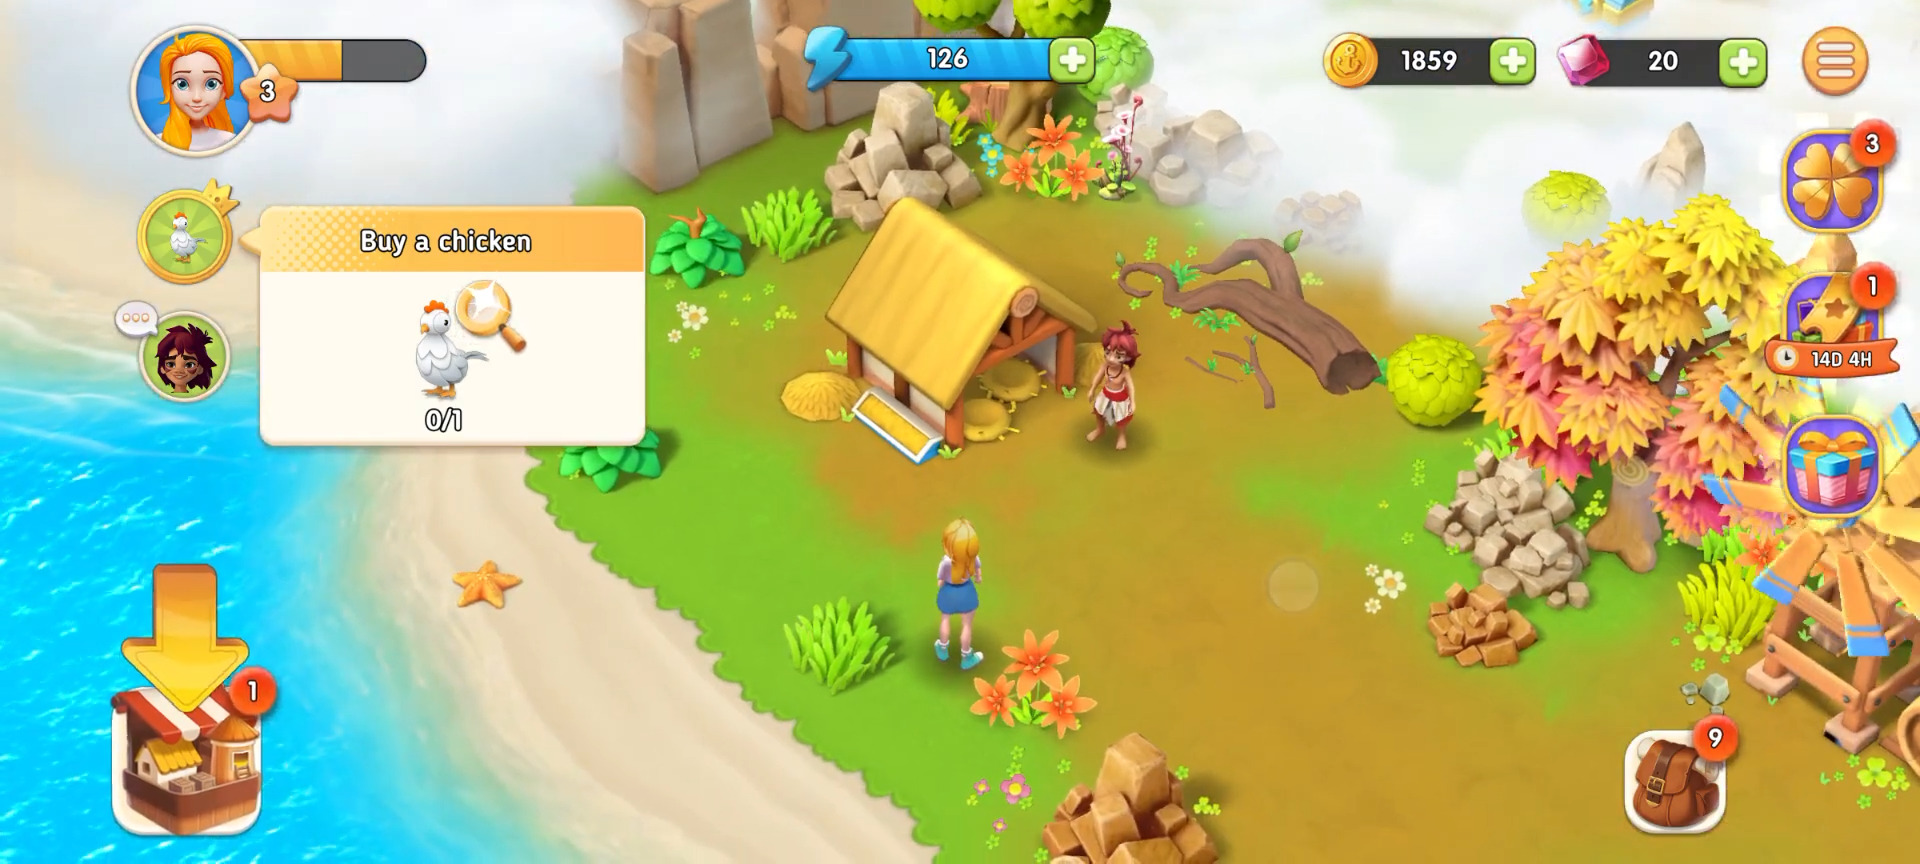 Gameplay of the Island Farm Adventure for Android phone or tablet.